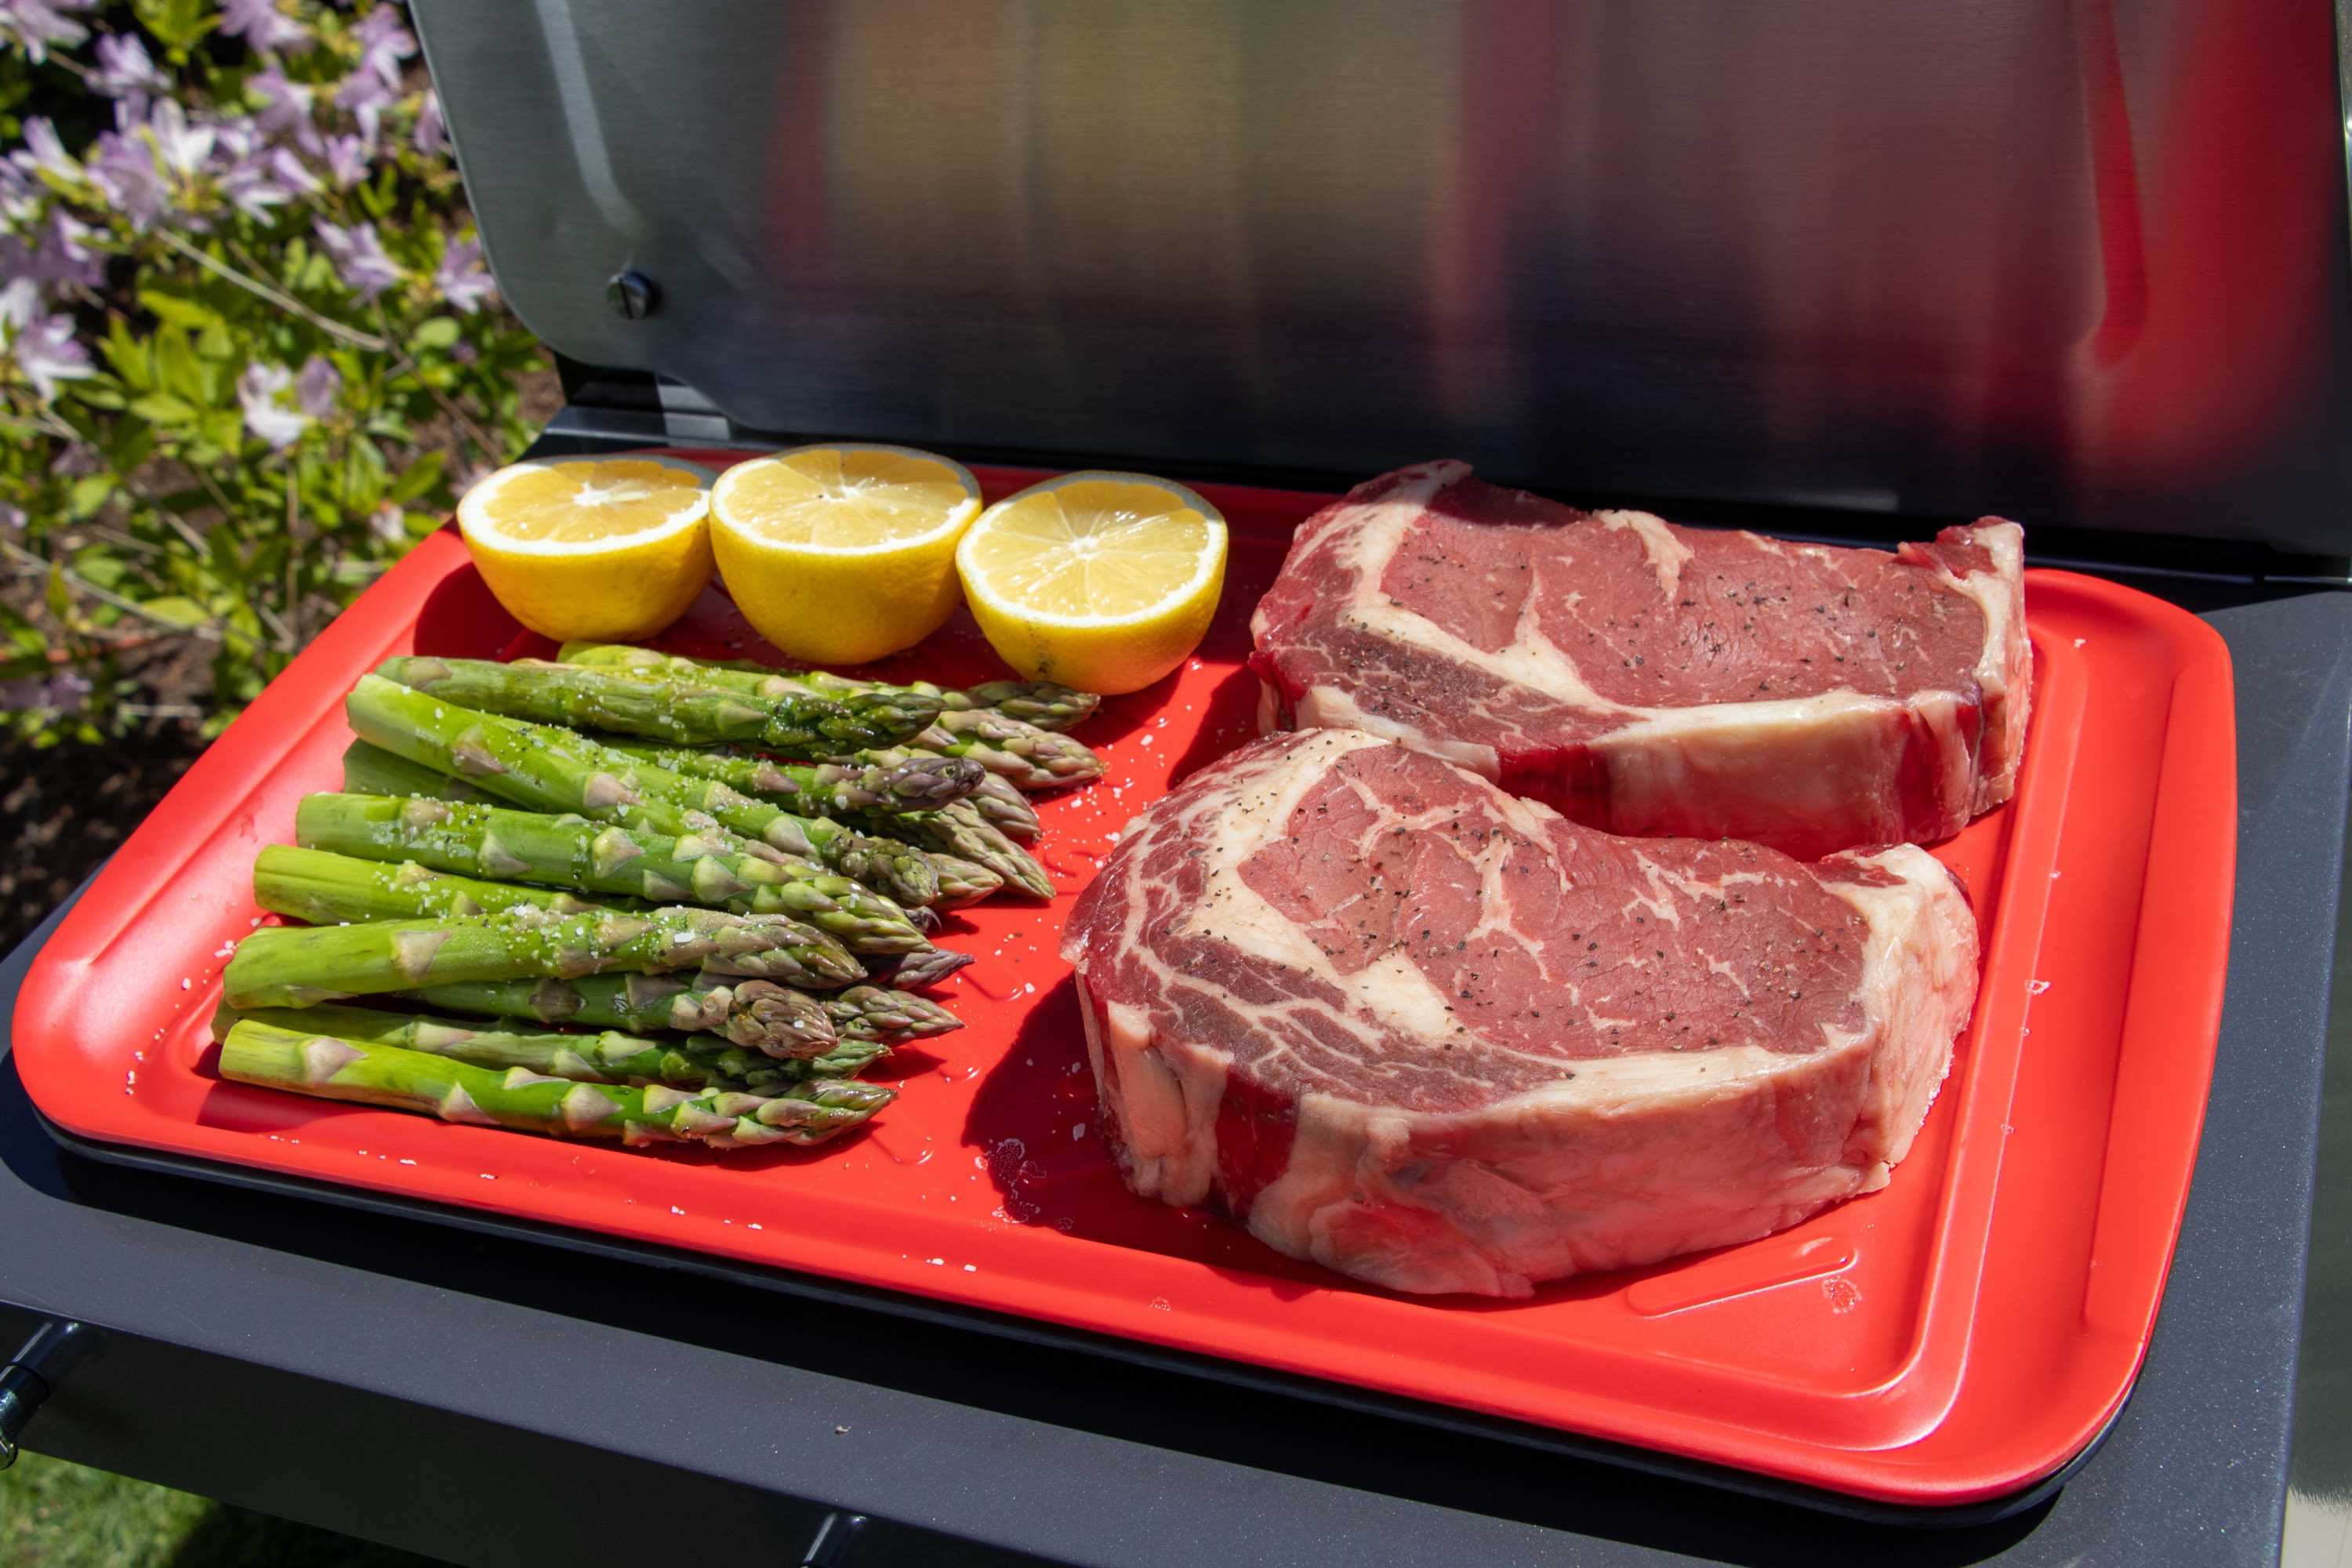 Grilling Prep and Serve Trays